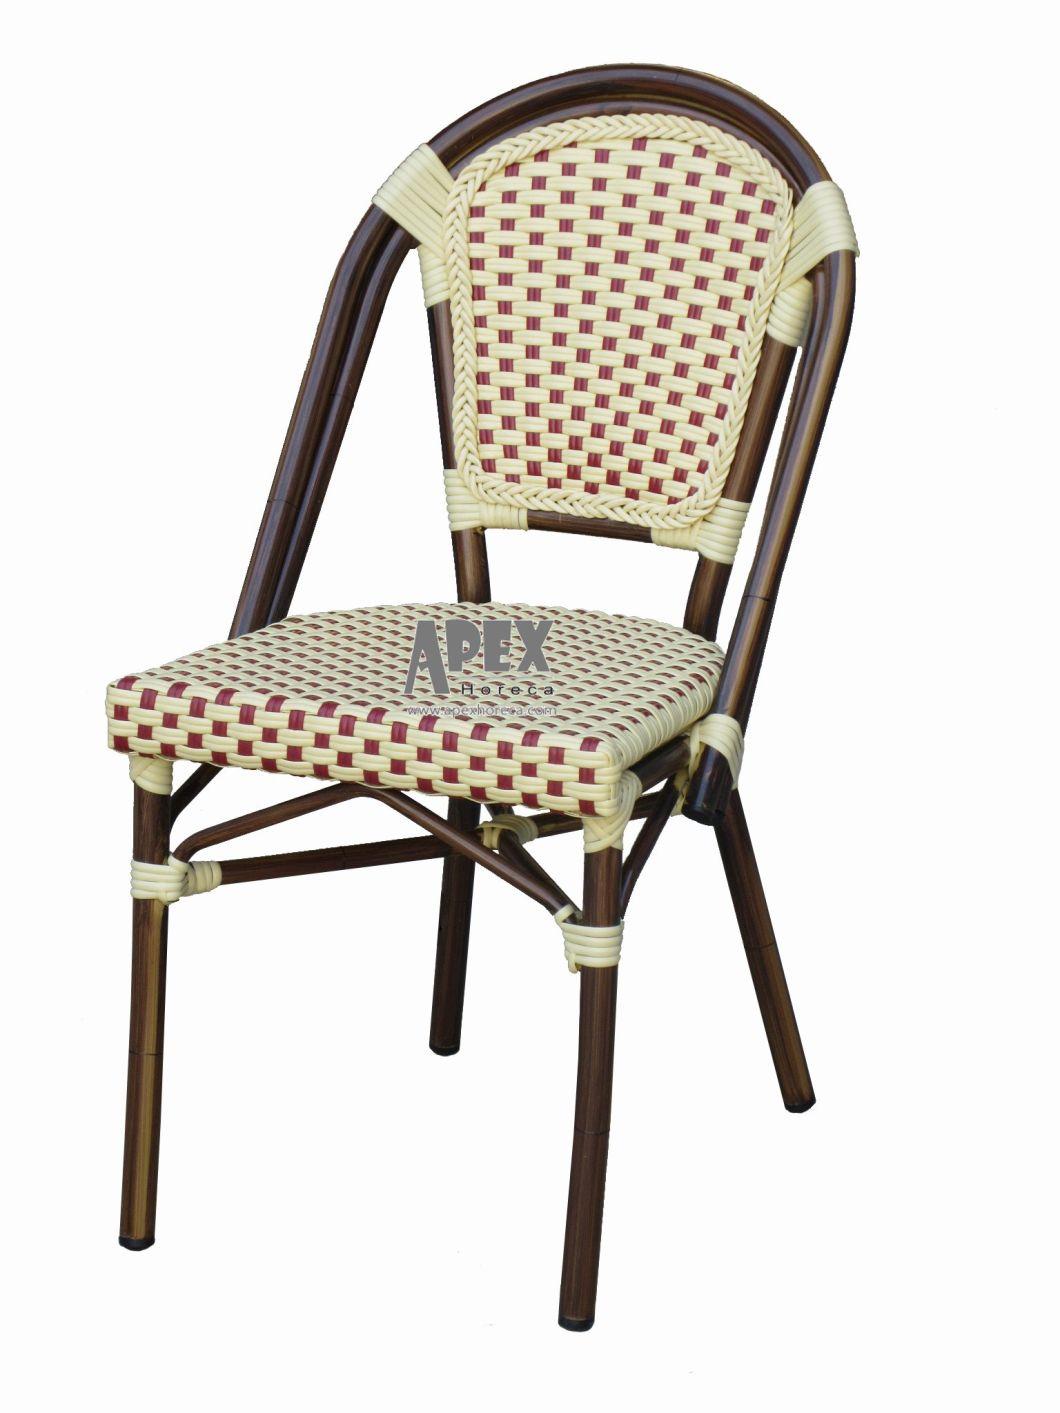 Patio Outdoor Furniture Hotel Dining Bamboo Look Chairs